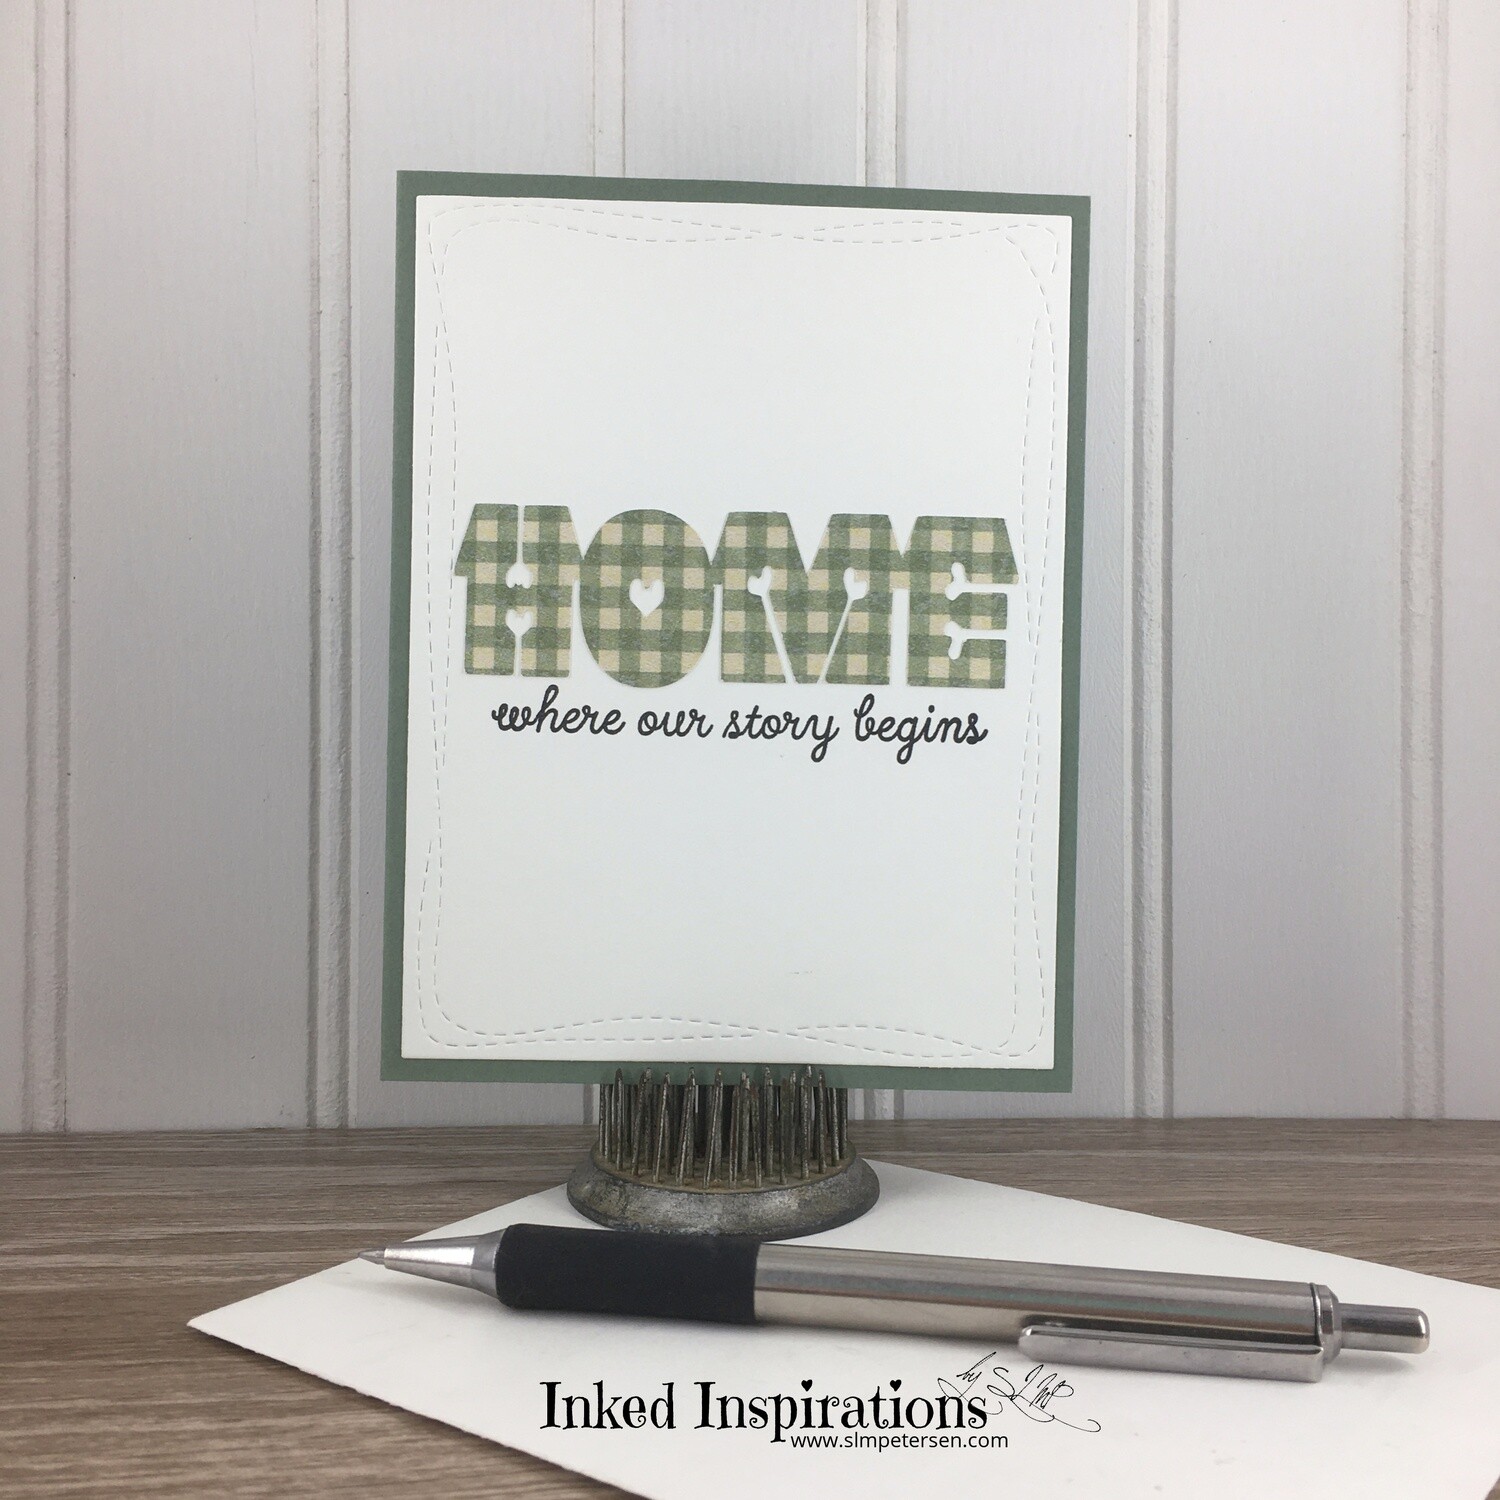 Home Where Our Story Begins - Green Plaid